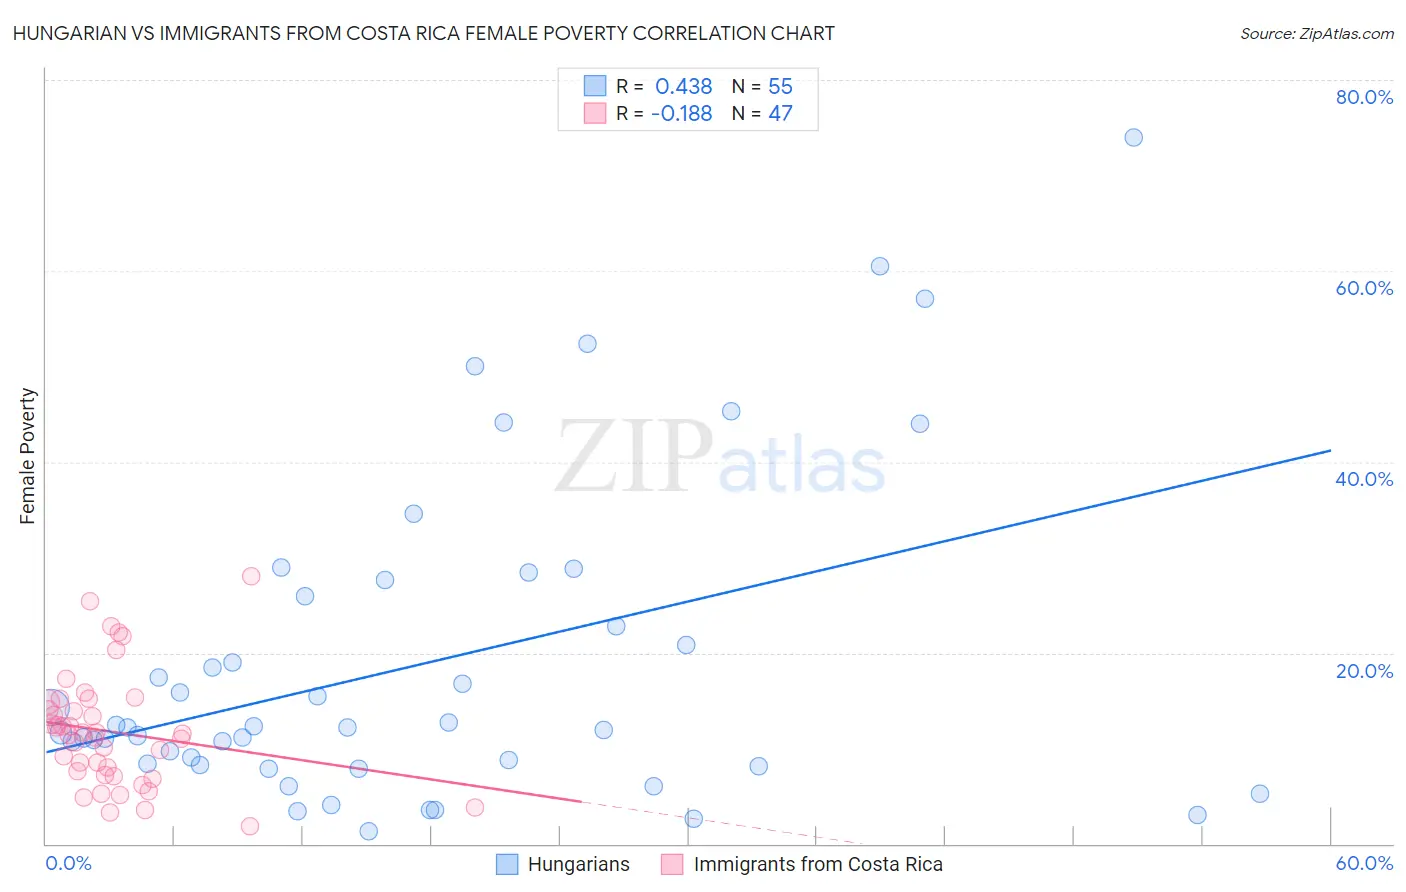 Hungarian vs Immigrants from Costa Rica Female Poverty